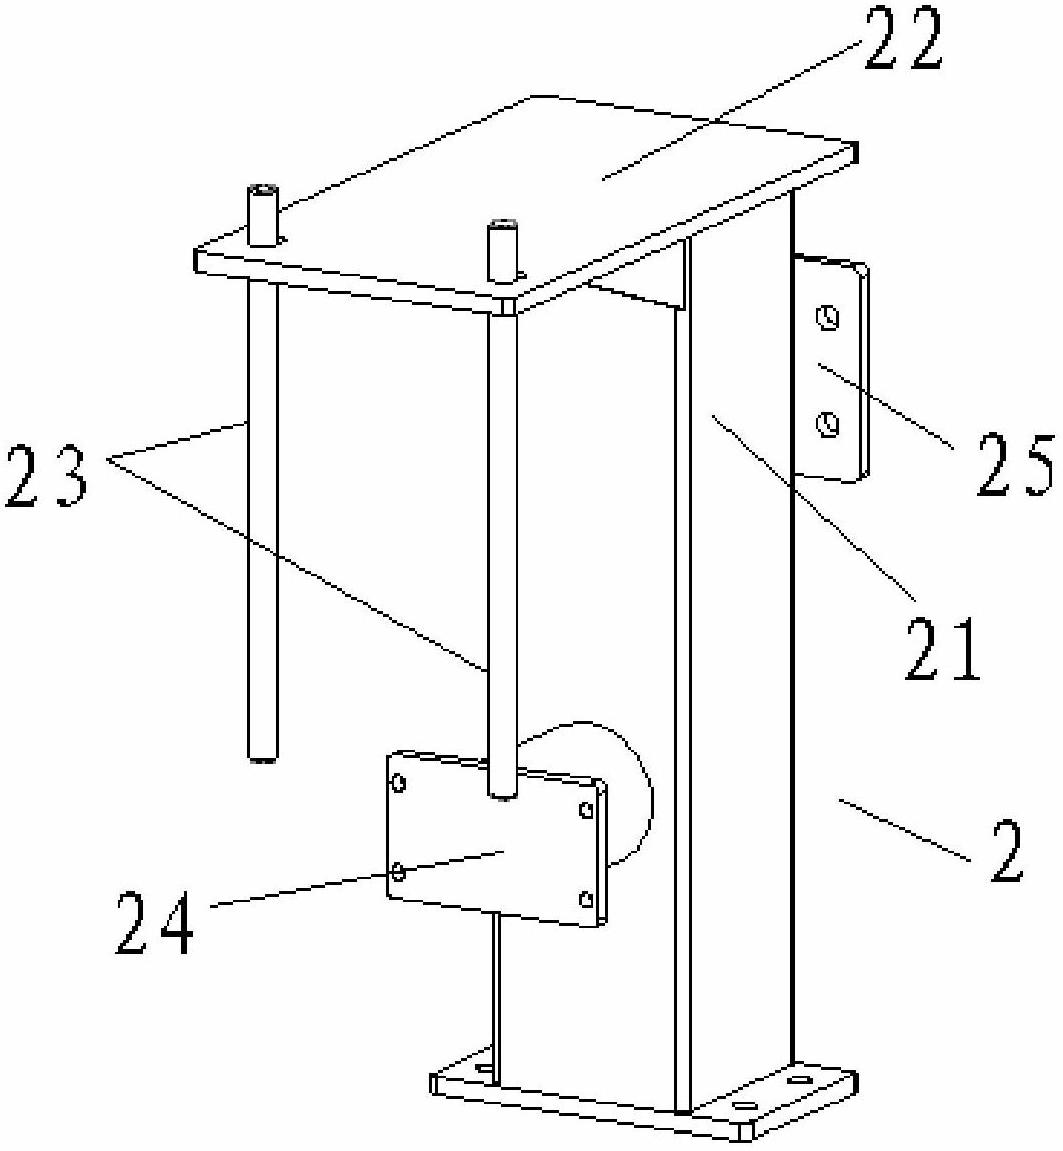 Dummy hip joint calibration system and method for automobile collision